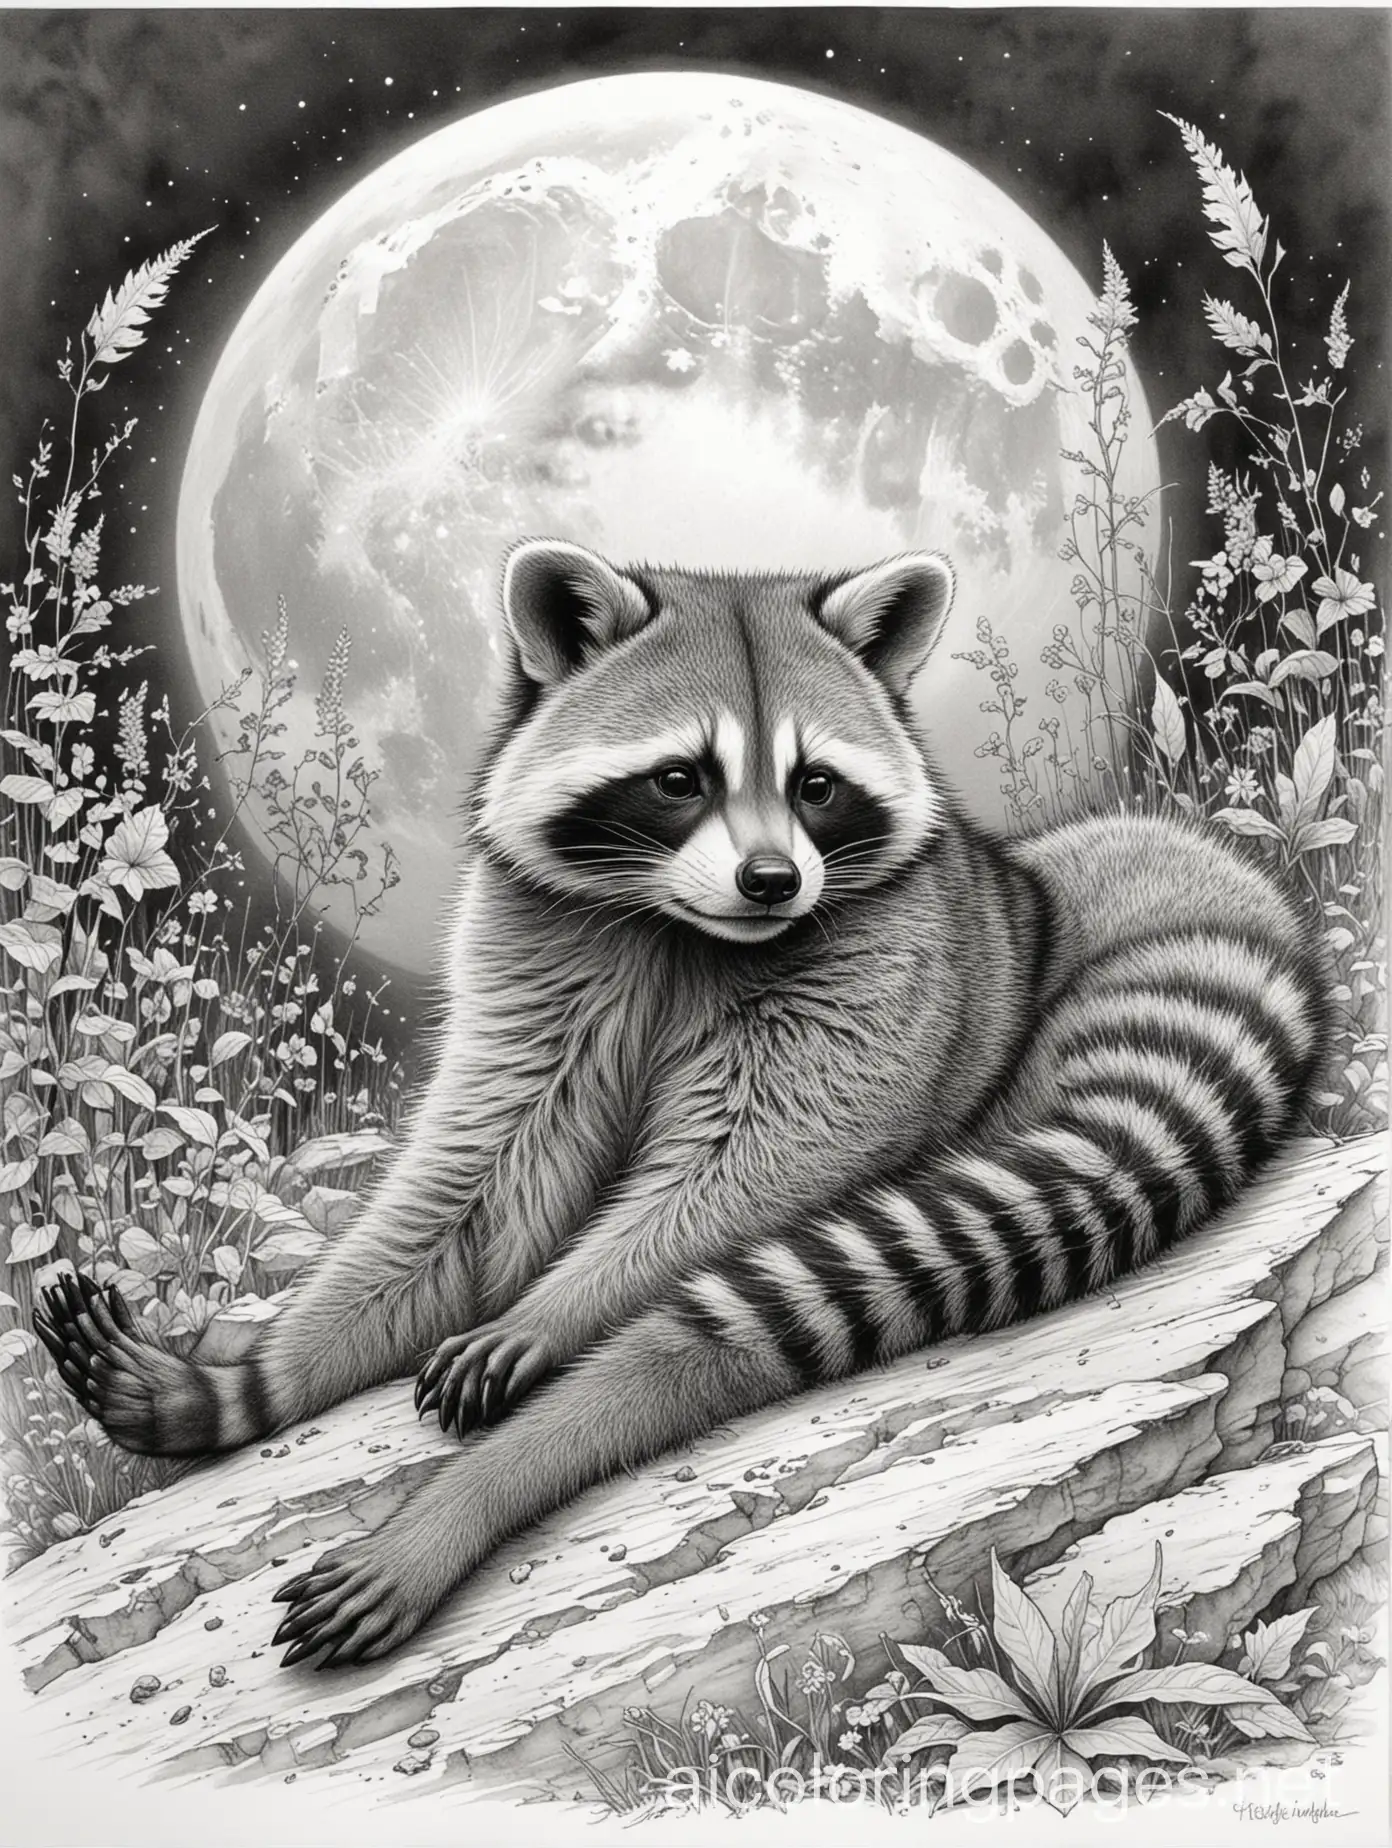 beneath an ivory moon, the raccoon lay sleeping, Jean-Baptiste Monge style, Coloring Page, black and white, line art, white background, Simplicity, Ample White Space. The background of the coloring page is plain white to make it easy for young children to color within the lines. The outlines of all the subjects are easy to distinguish, making it simple for kids to color without too much difficulty